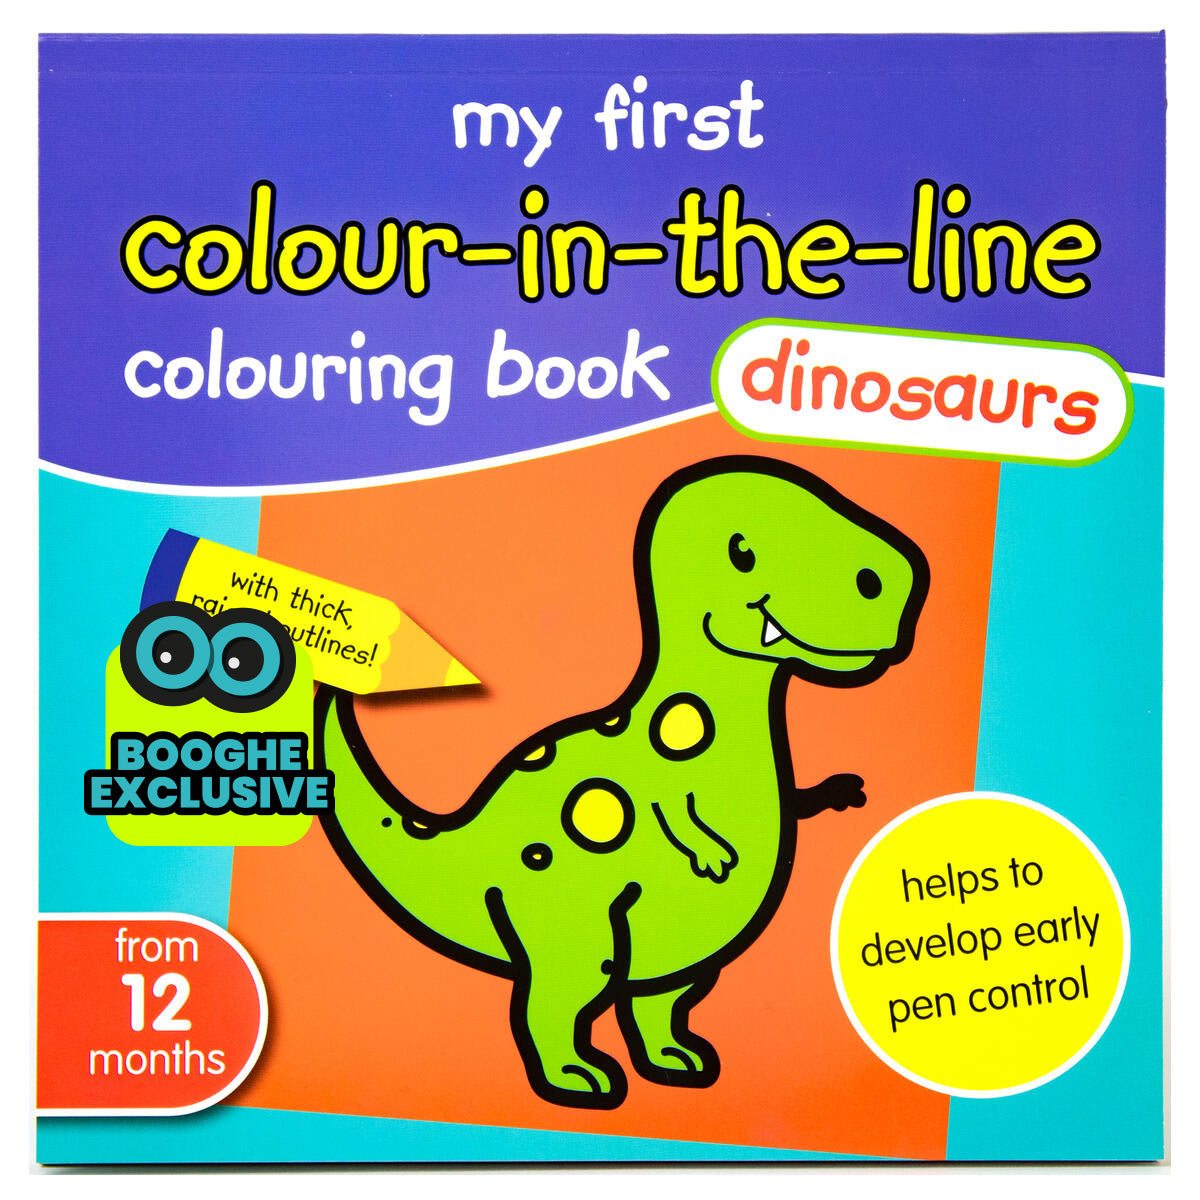 my first colour-in-the-line colouring book dinosaurs